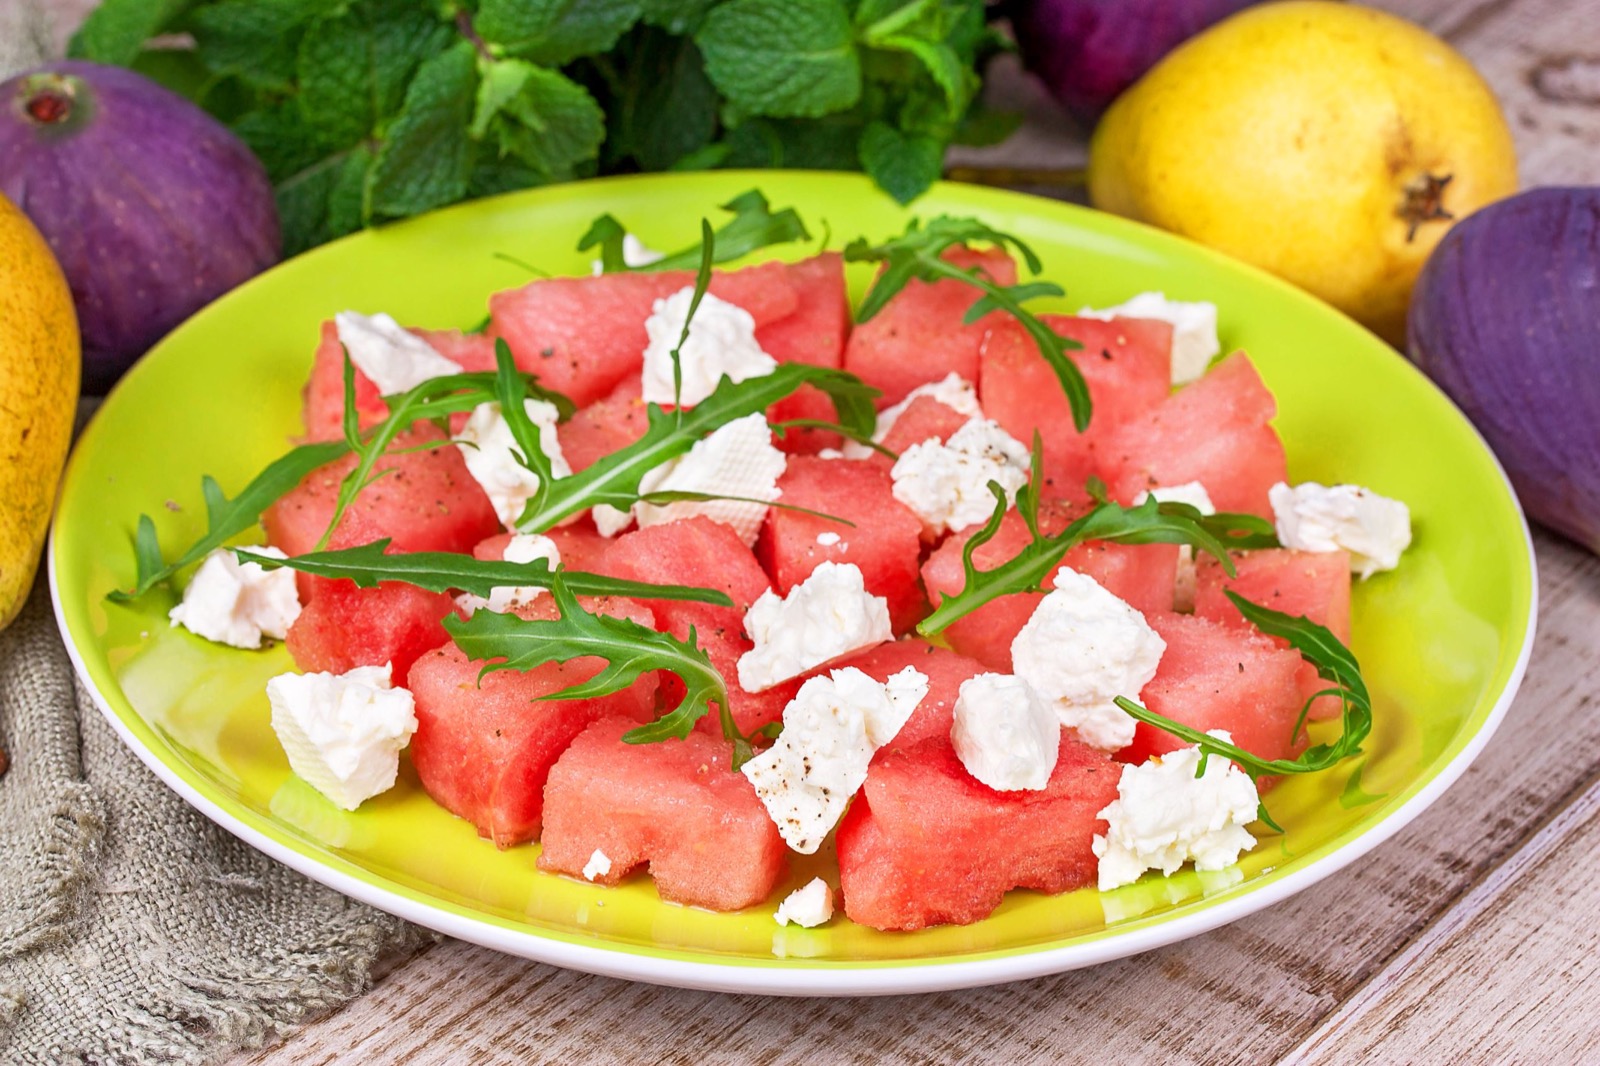 Say “Yum” Or “Yuck” to These Food Pairings to Find Out If You Are More Creative or Logical Watermelon and feta salad